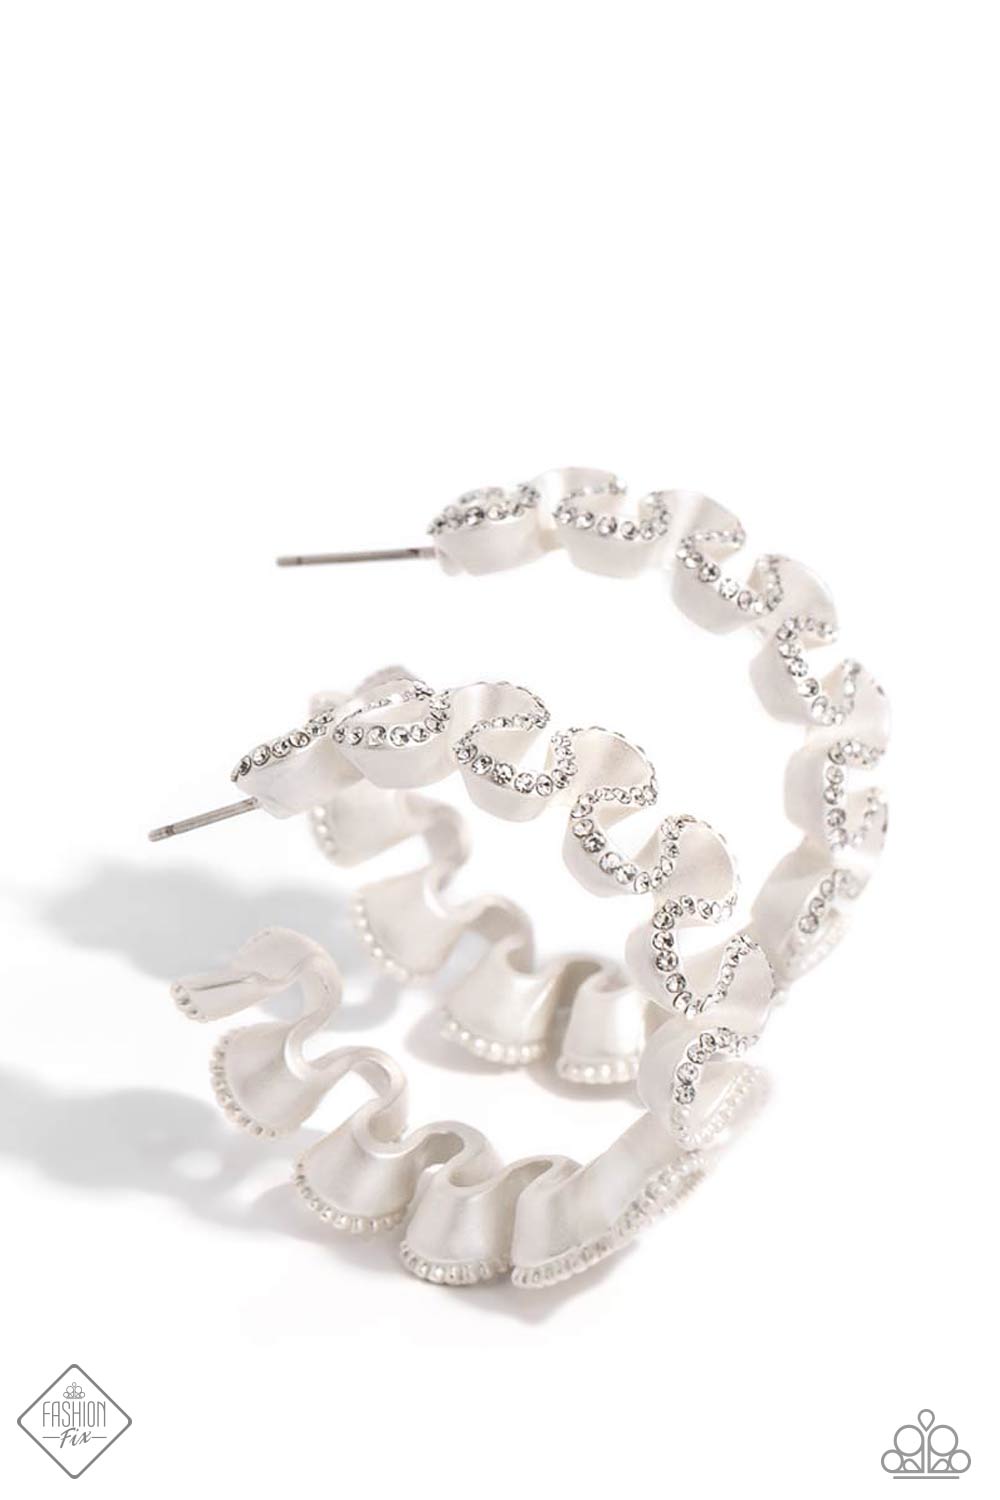 Resolutely Ruffled White Hoop Earring - Paparazzi Accessories  Meticulously dotted with white rhinestones, white pearlescent-painted ribbons playfully gather around the ear for an elegant display. Earring attaches to a standard post fitting. Hoop measures approximately 1 1/2" in diameter.  Sold as one pair of hoop earrings.  Sku:  P5HO-WTXX-160SY